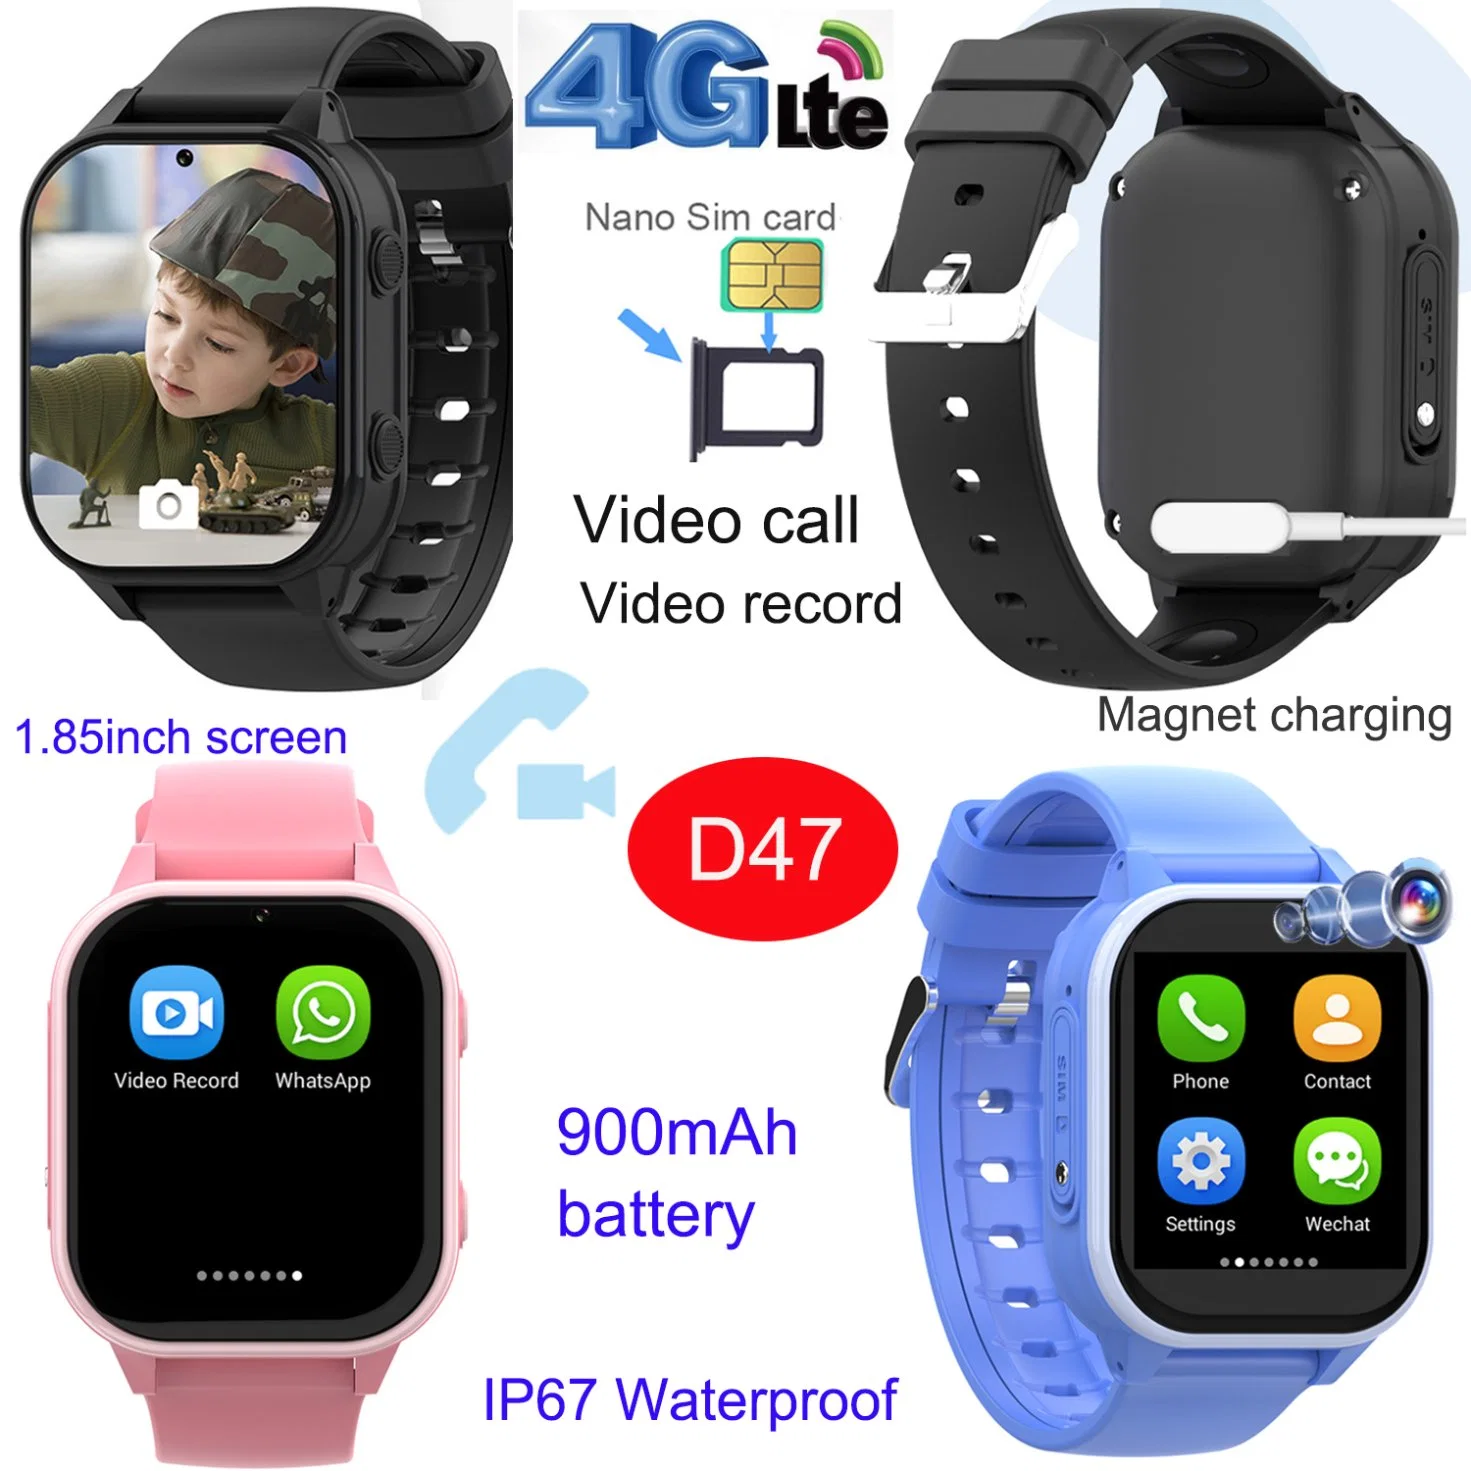 4G Long battery life waterproof wearable safeguard Christmas gift video call SOS Smart Watch GPS Tracker with safety zone setup D47